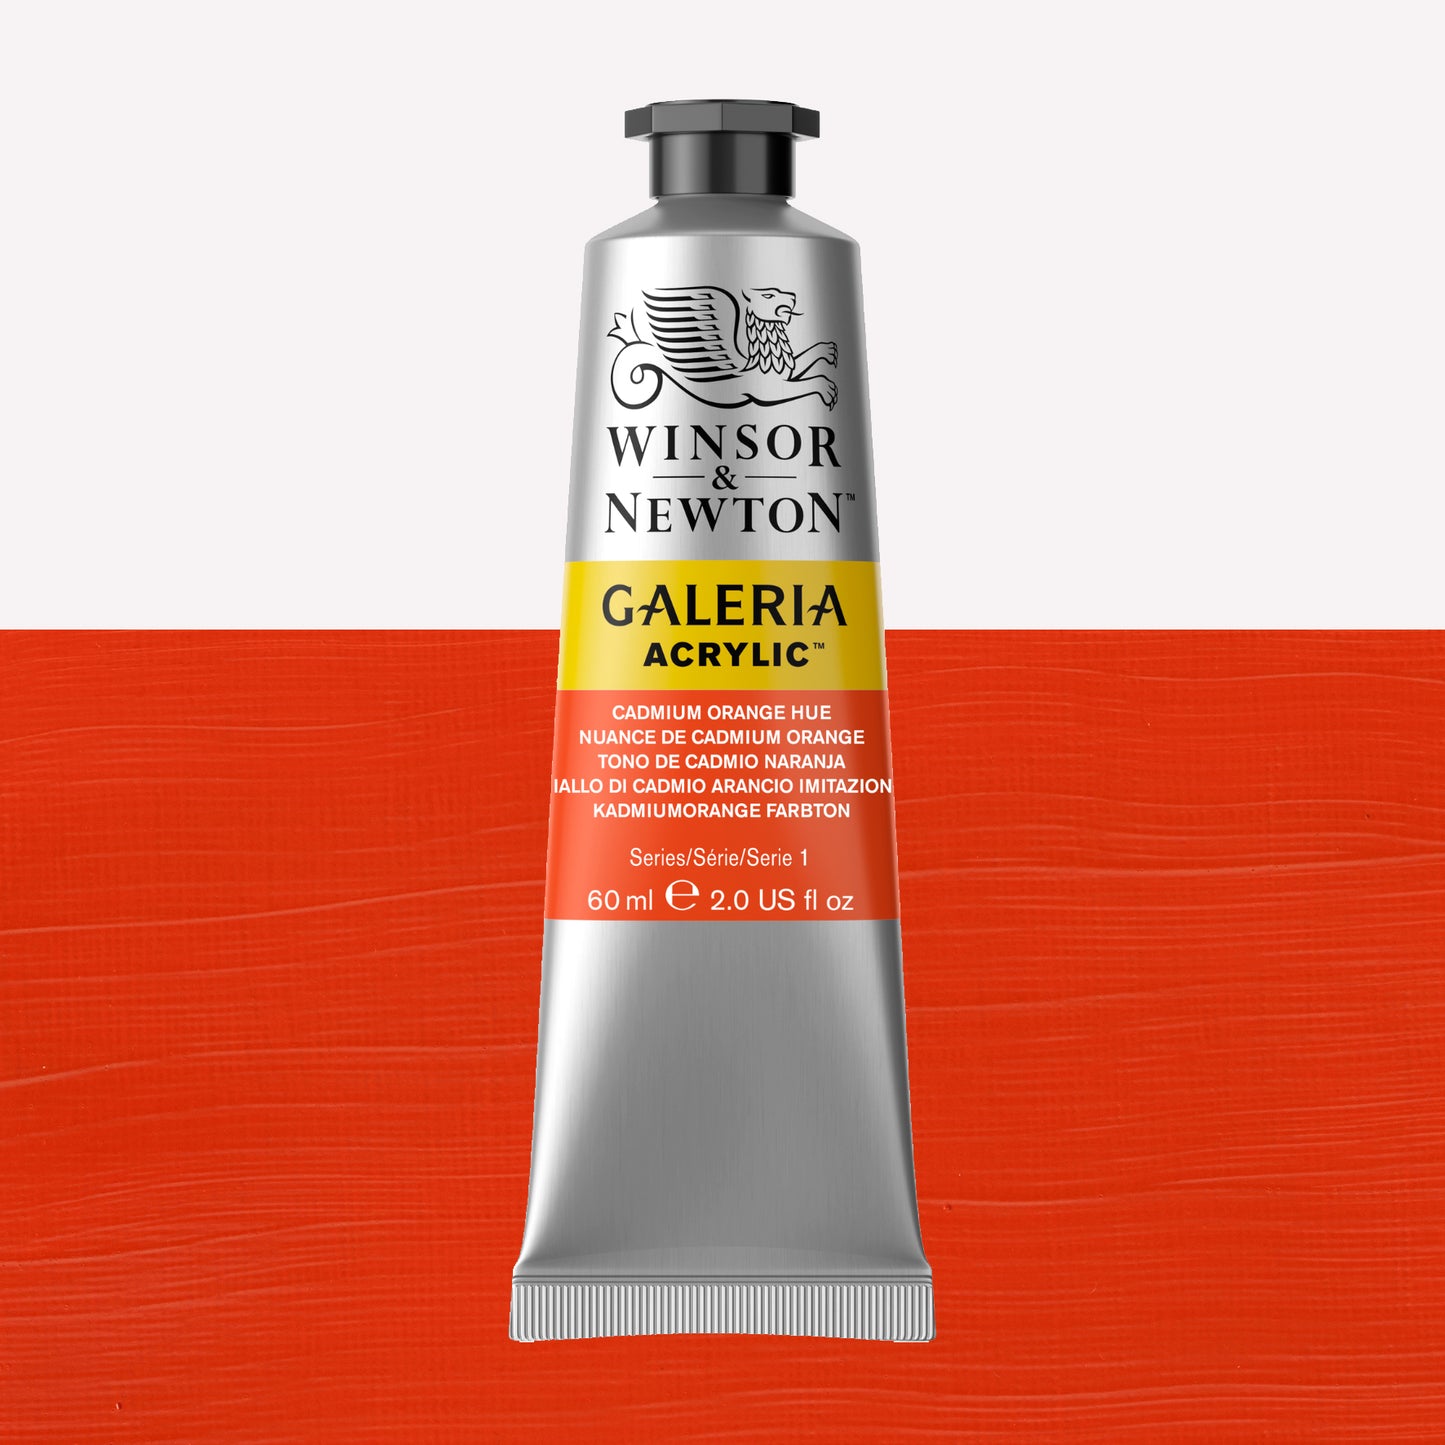 A 60ml tube of vibrant Galeria Acrylic paint in the shade Cadmium Orange Hue. This paint, made by Winsor and Newton, is packaged in a silver tube with a black lid. 